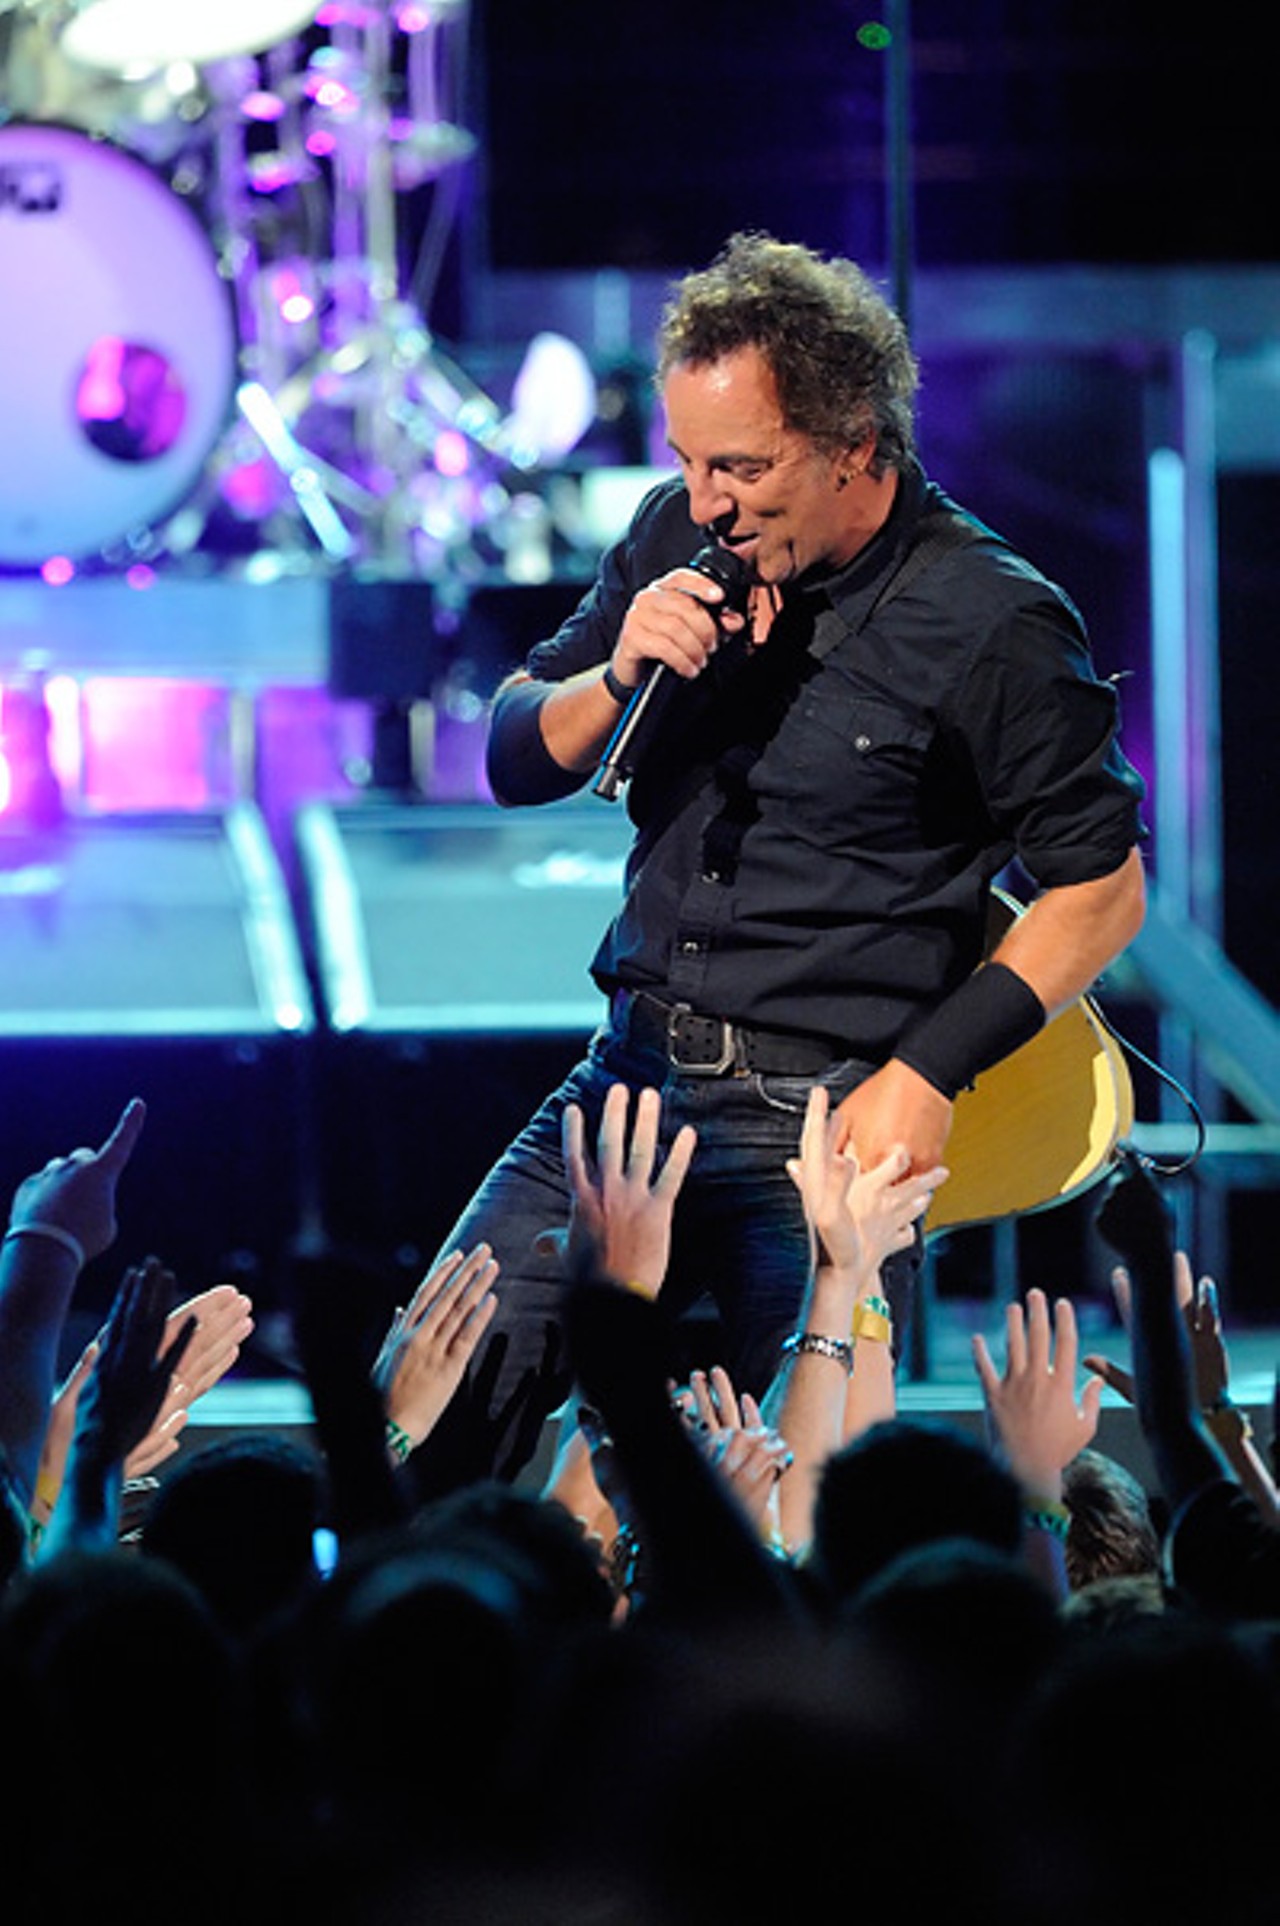 Springsteen went into the crowd throughout the night, most notably during the first few songs.
Read a review of show.